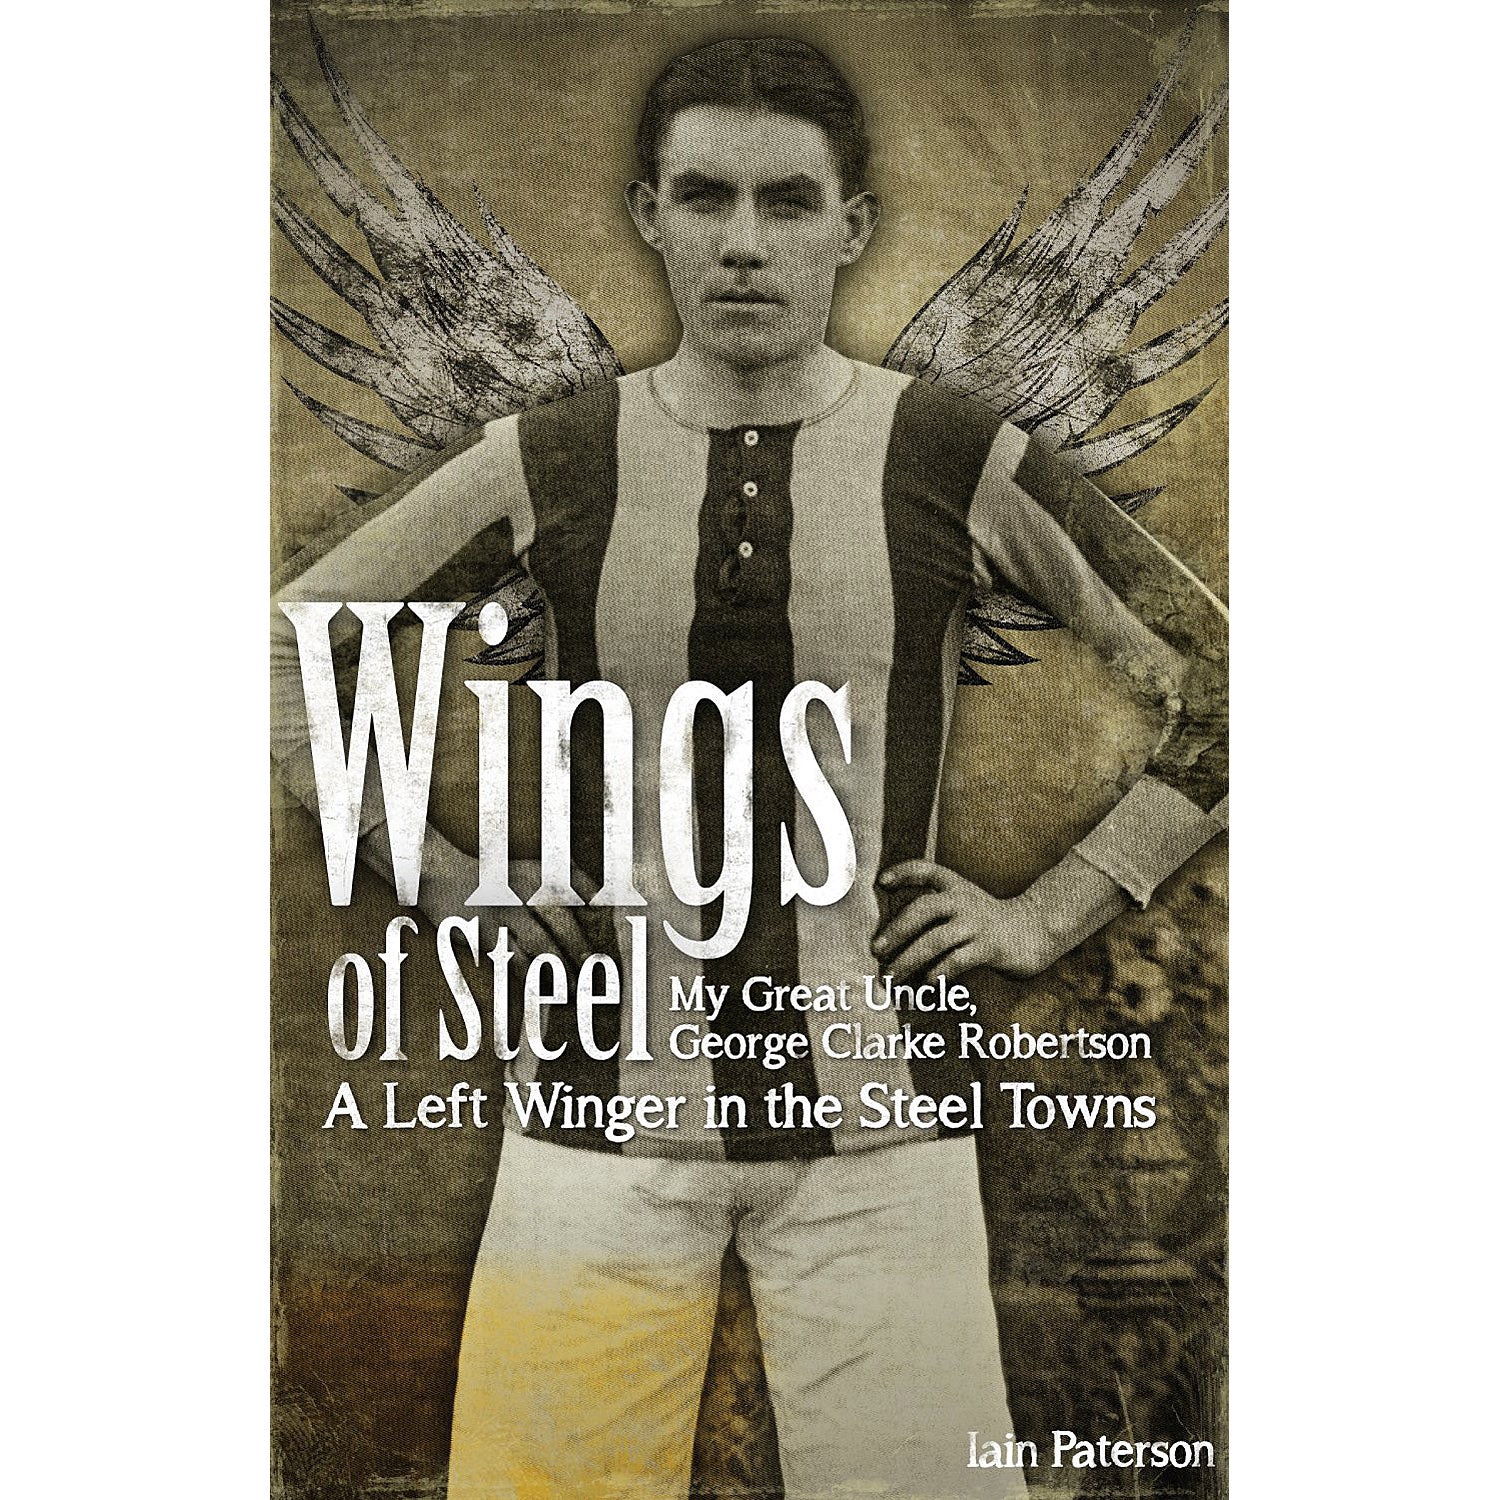 Wings of Steel – My Great Uncle, George Clarke Robertson – A Left Winger in the Steel Towns